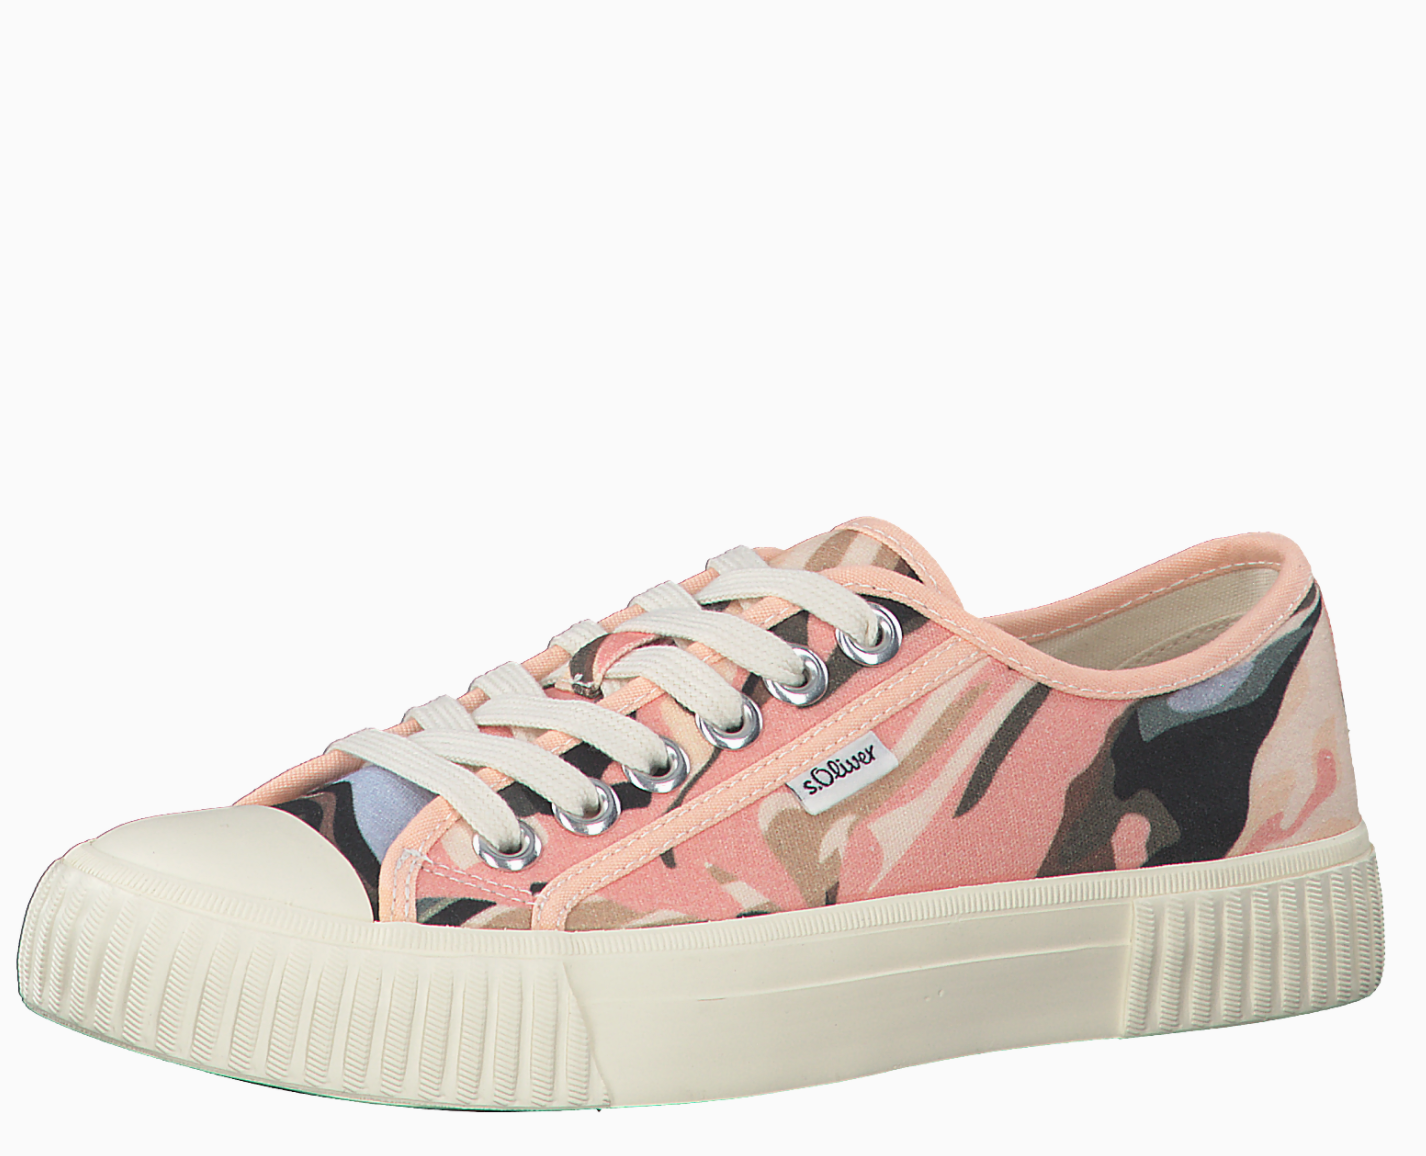 S.Oliver Womens Canvas Fashion Trainer - Pink